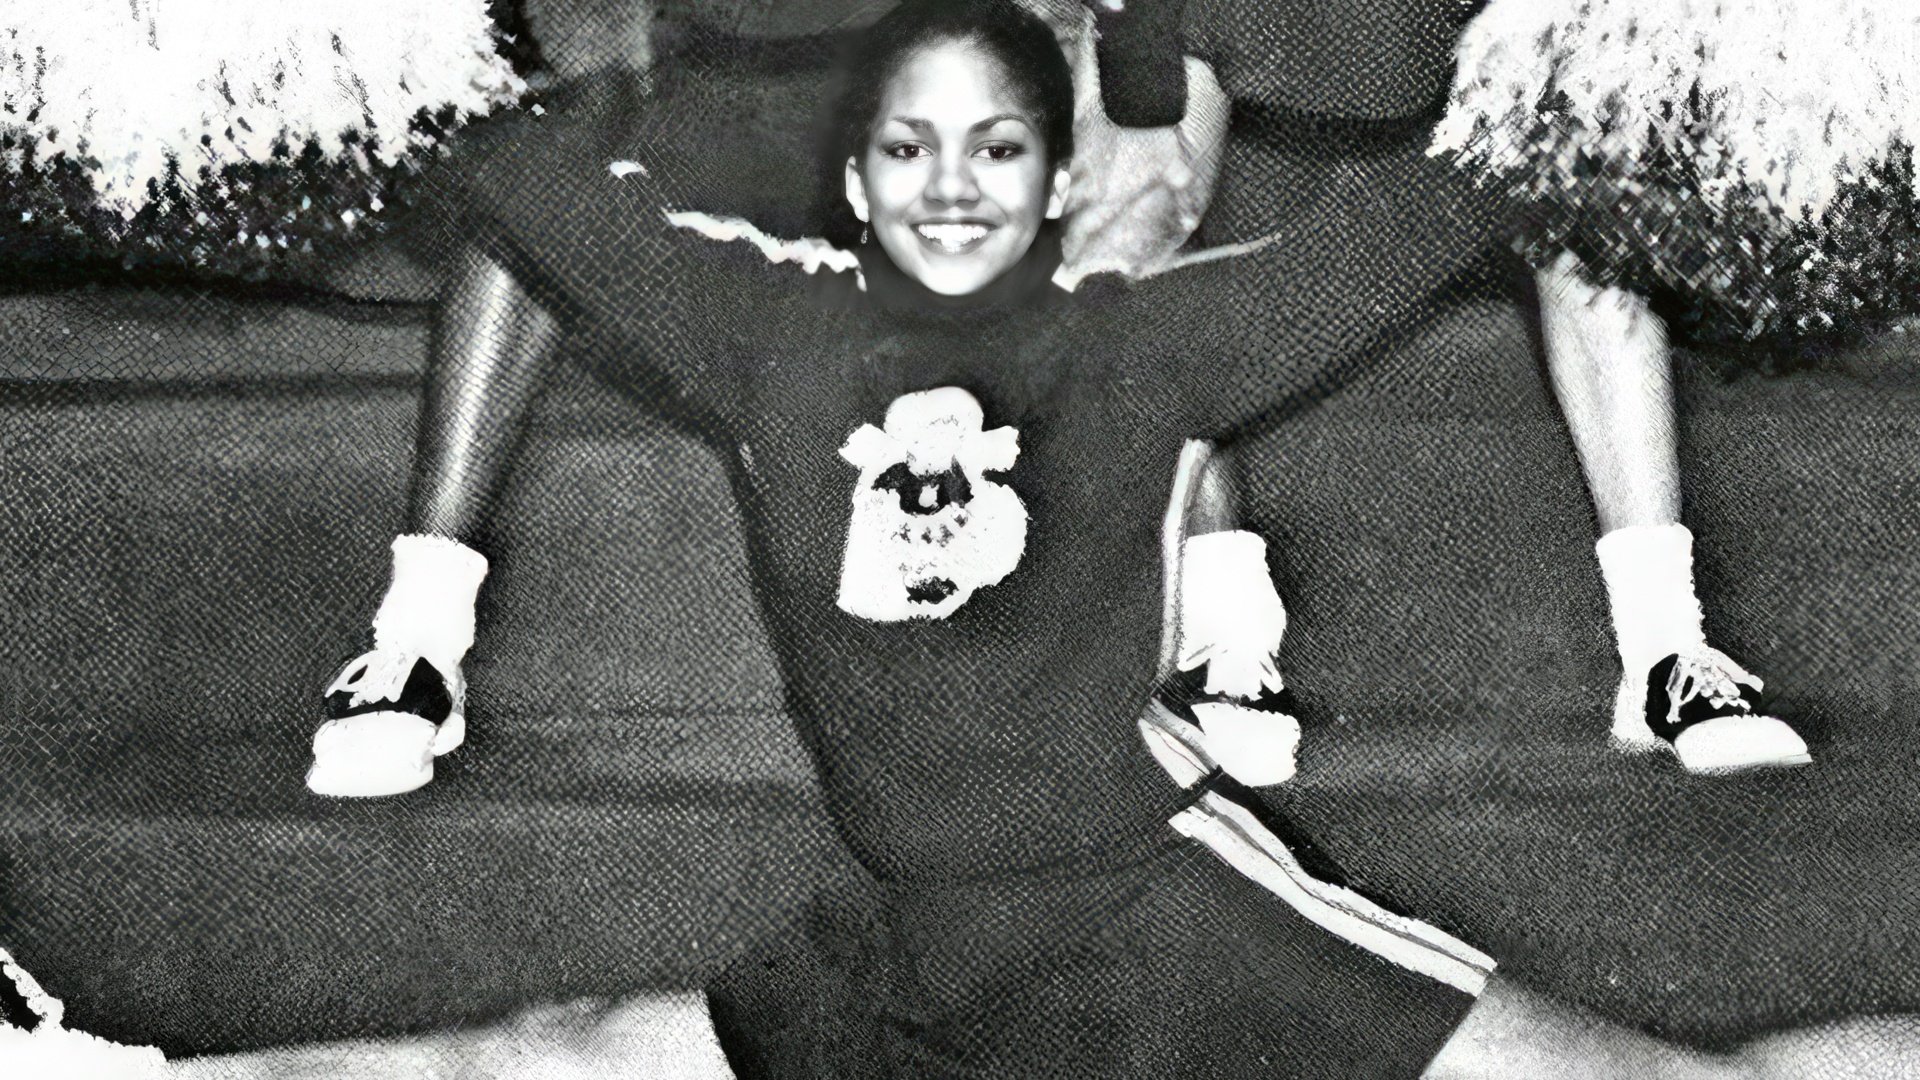 While attending Bedford High School, Halle was the head of the cheerleading team